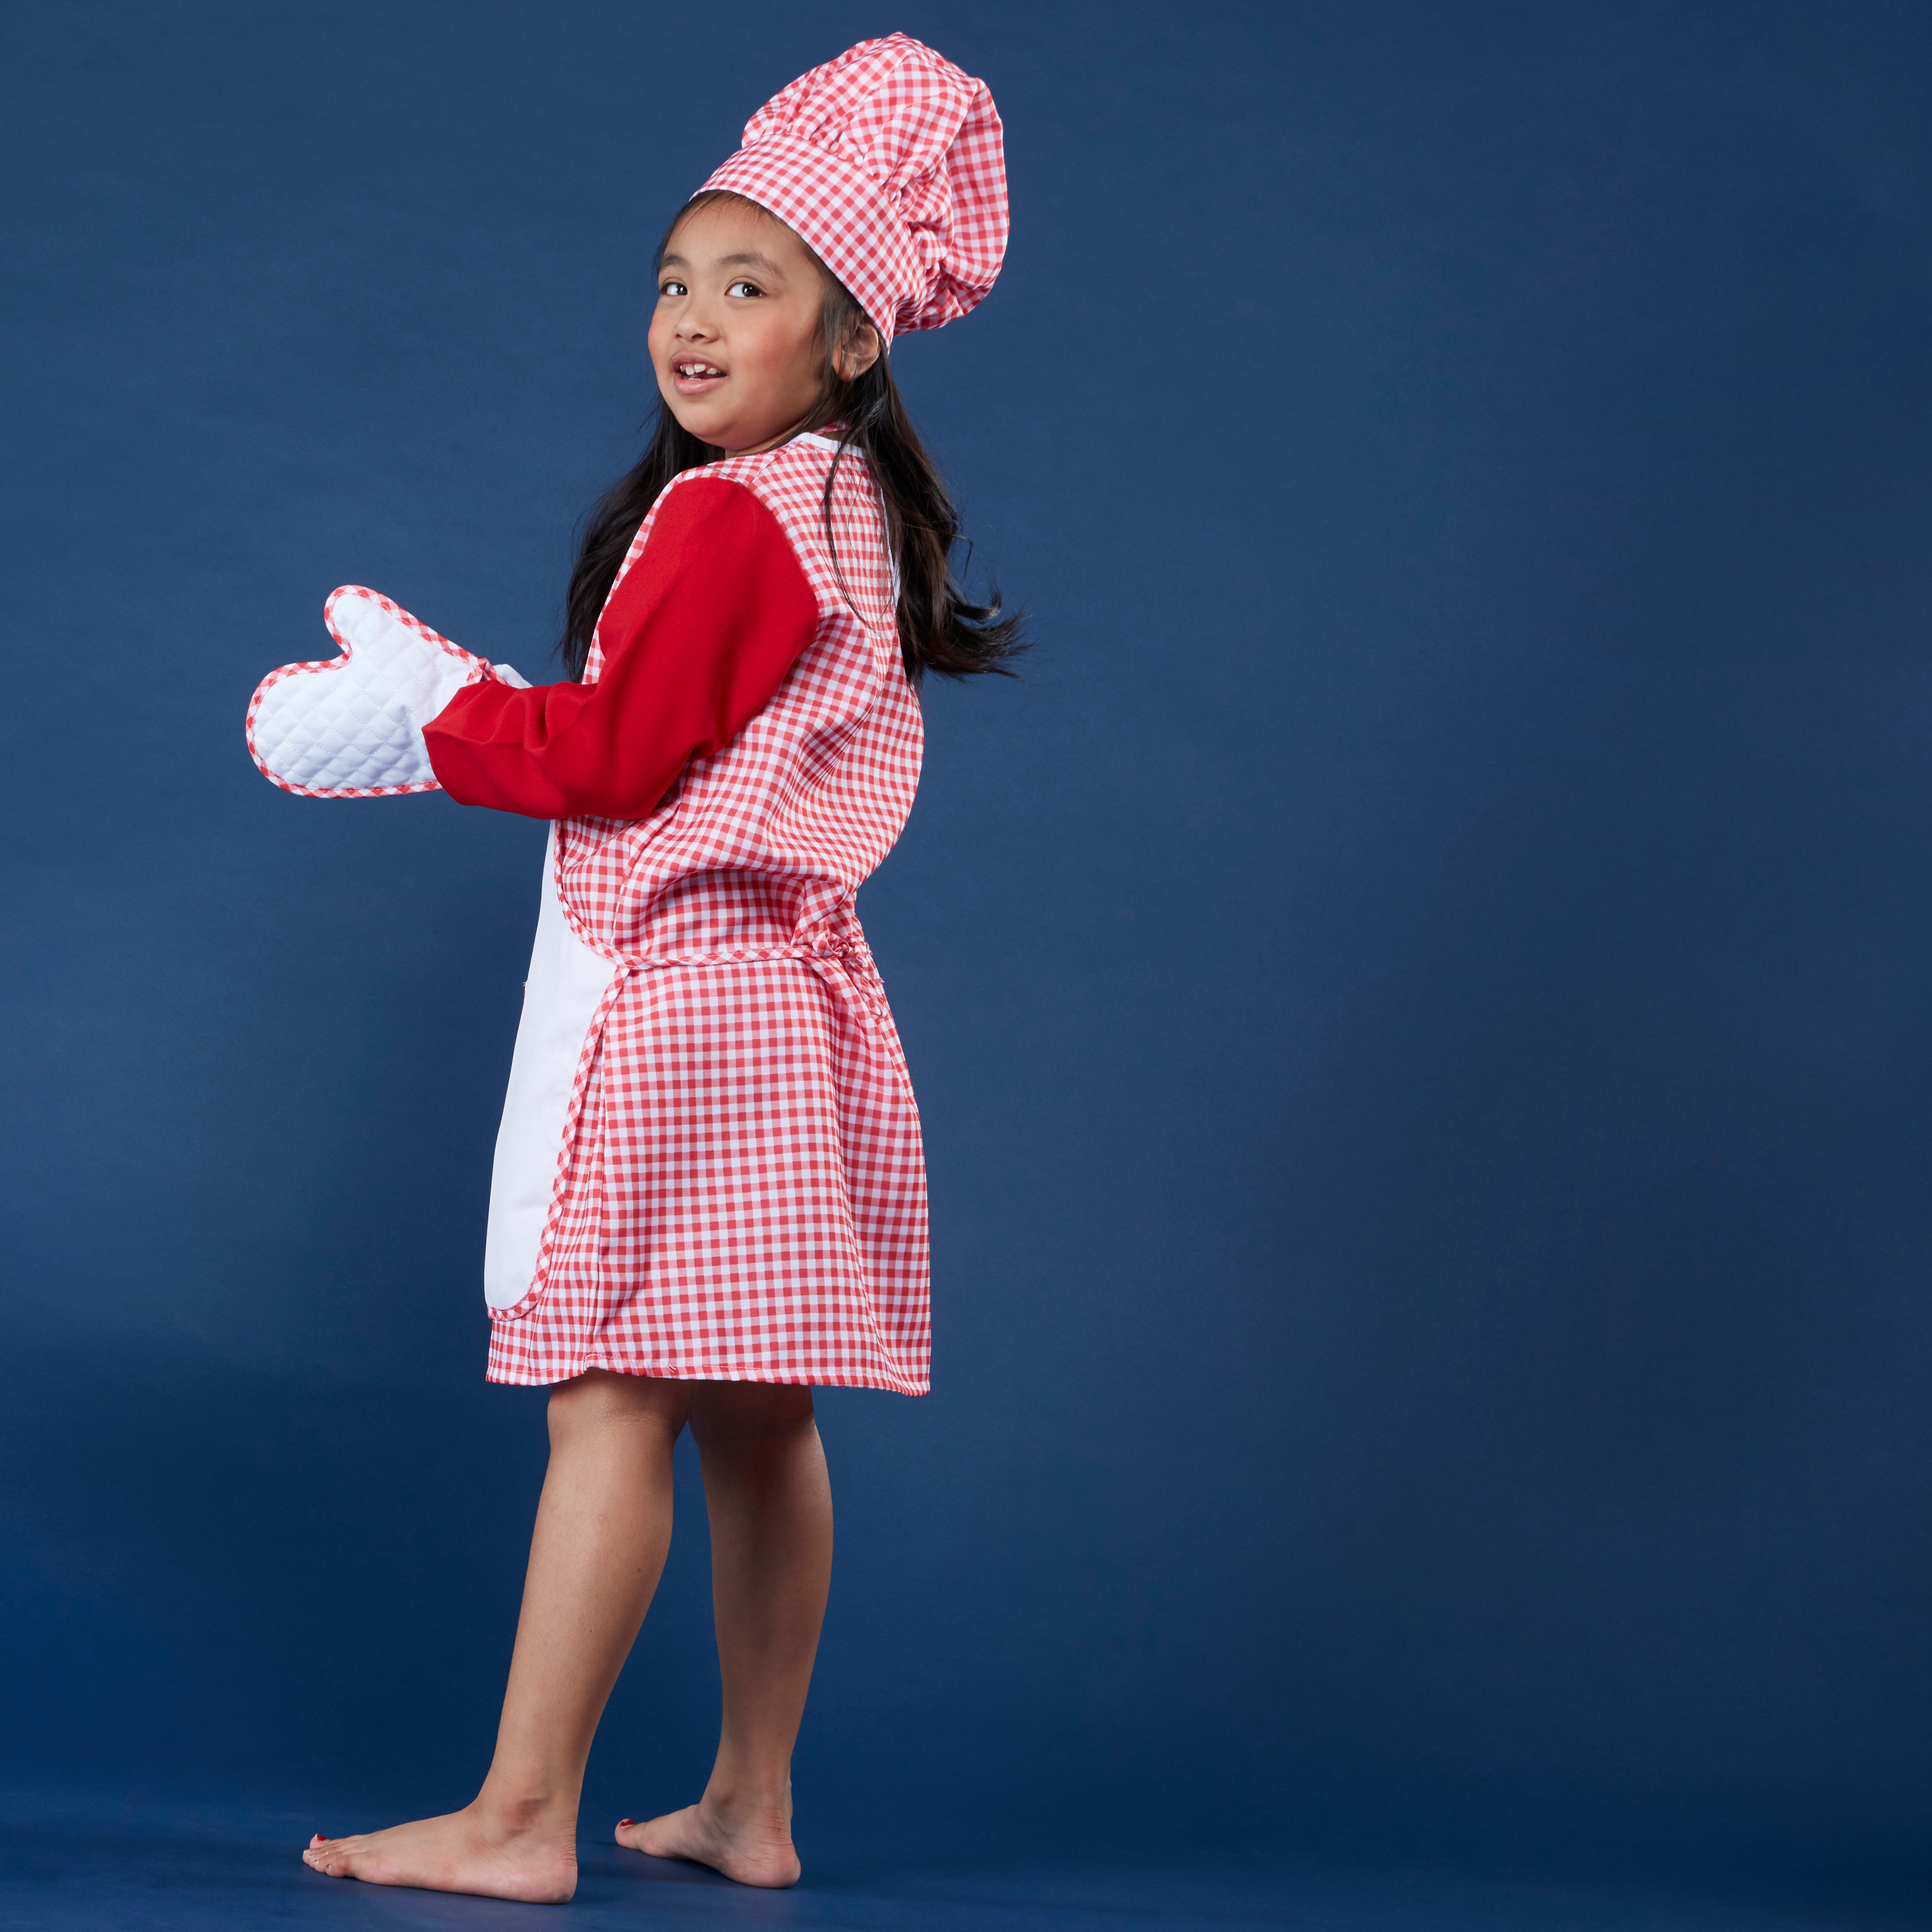 chef costumes for kids from Sears.com